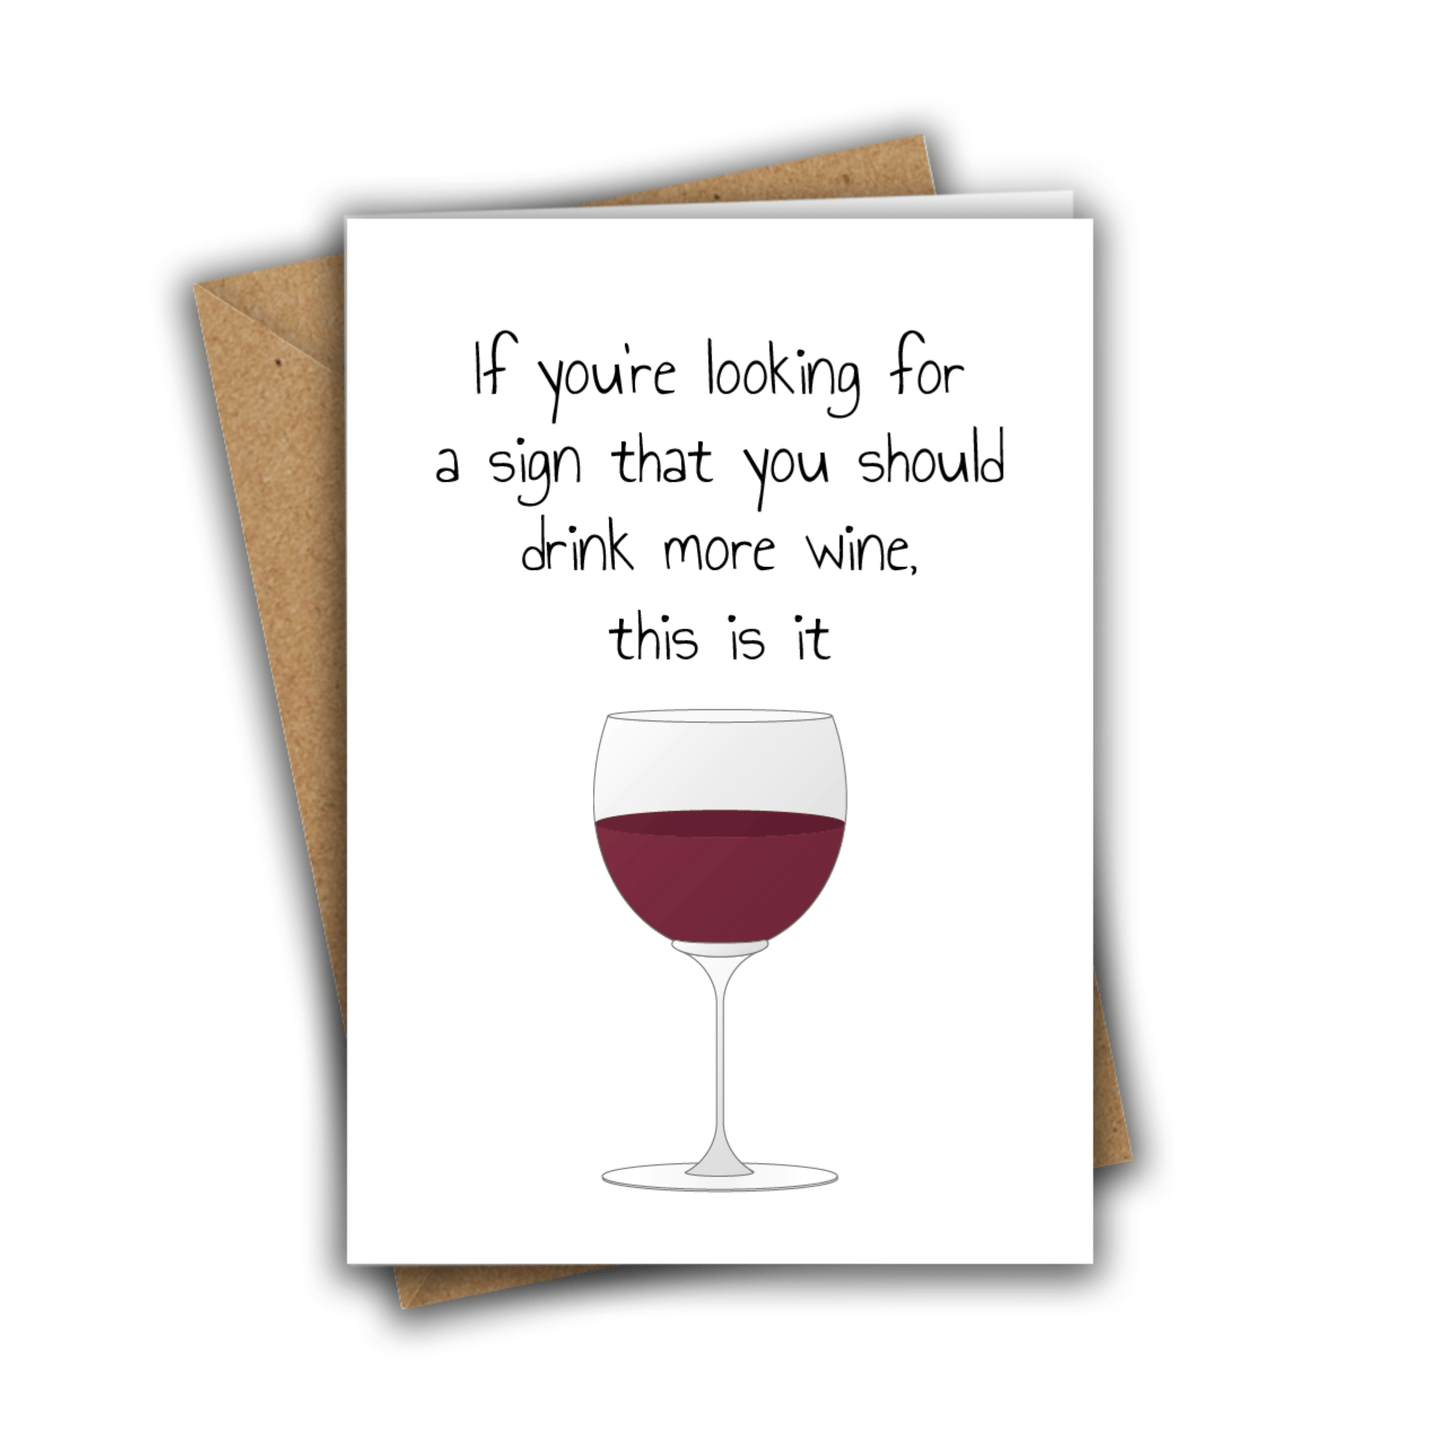 Little Kraken's Looking For a Sign You Should Drink More Wine, General Cards for £3.50 each